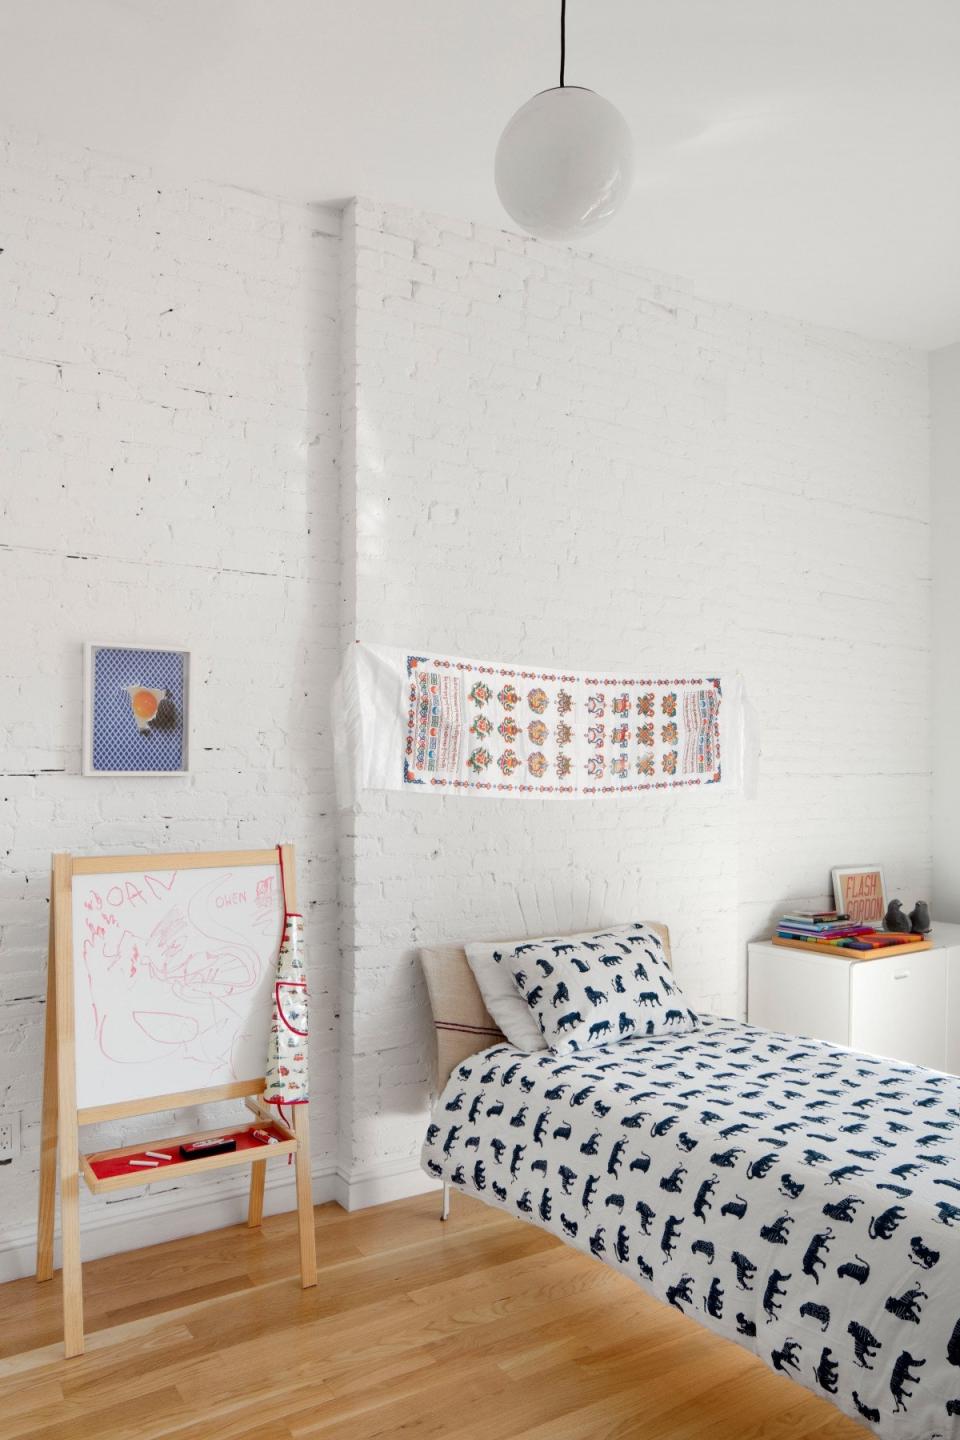 In the kids’ bedroom, the patterns and artwork continue. Here, a Sara Greenberger Rafferty print hangs on the wall.